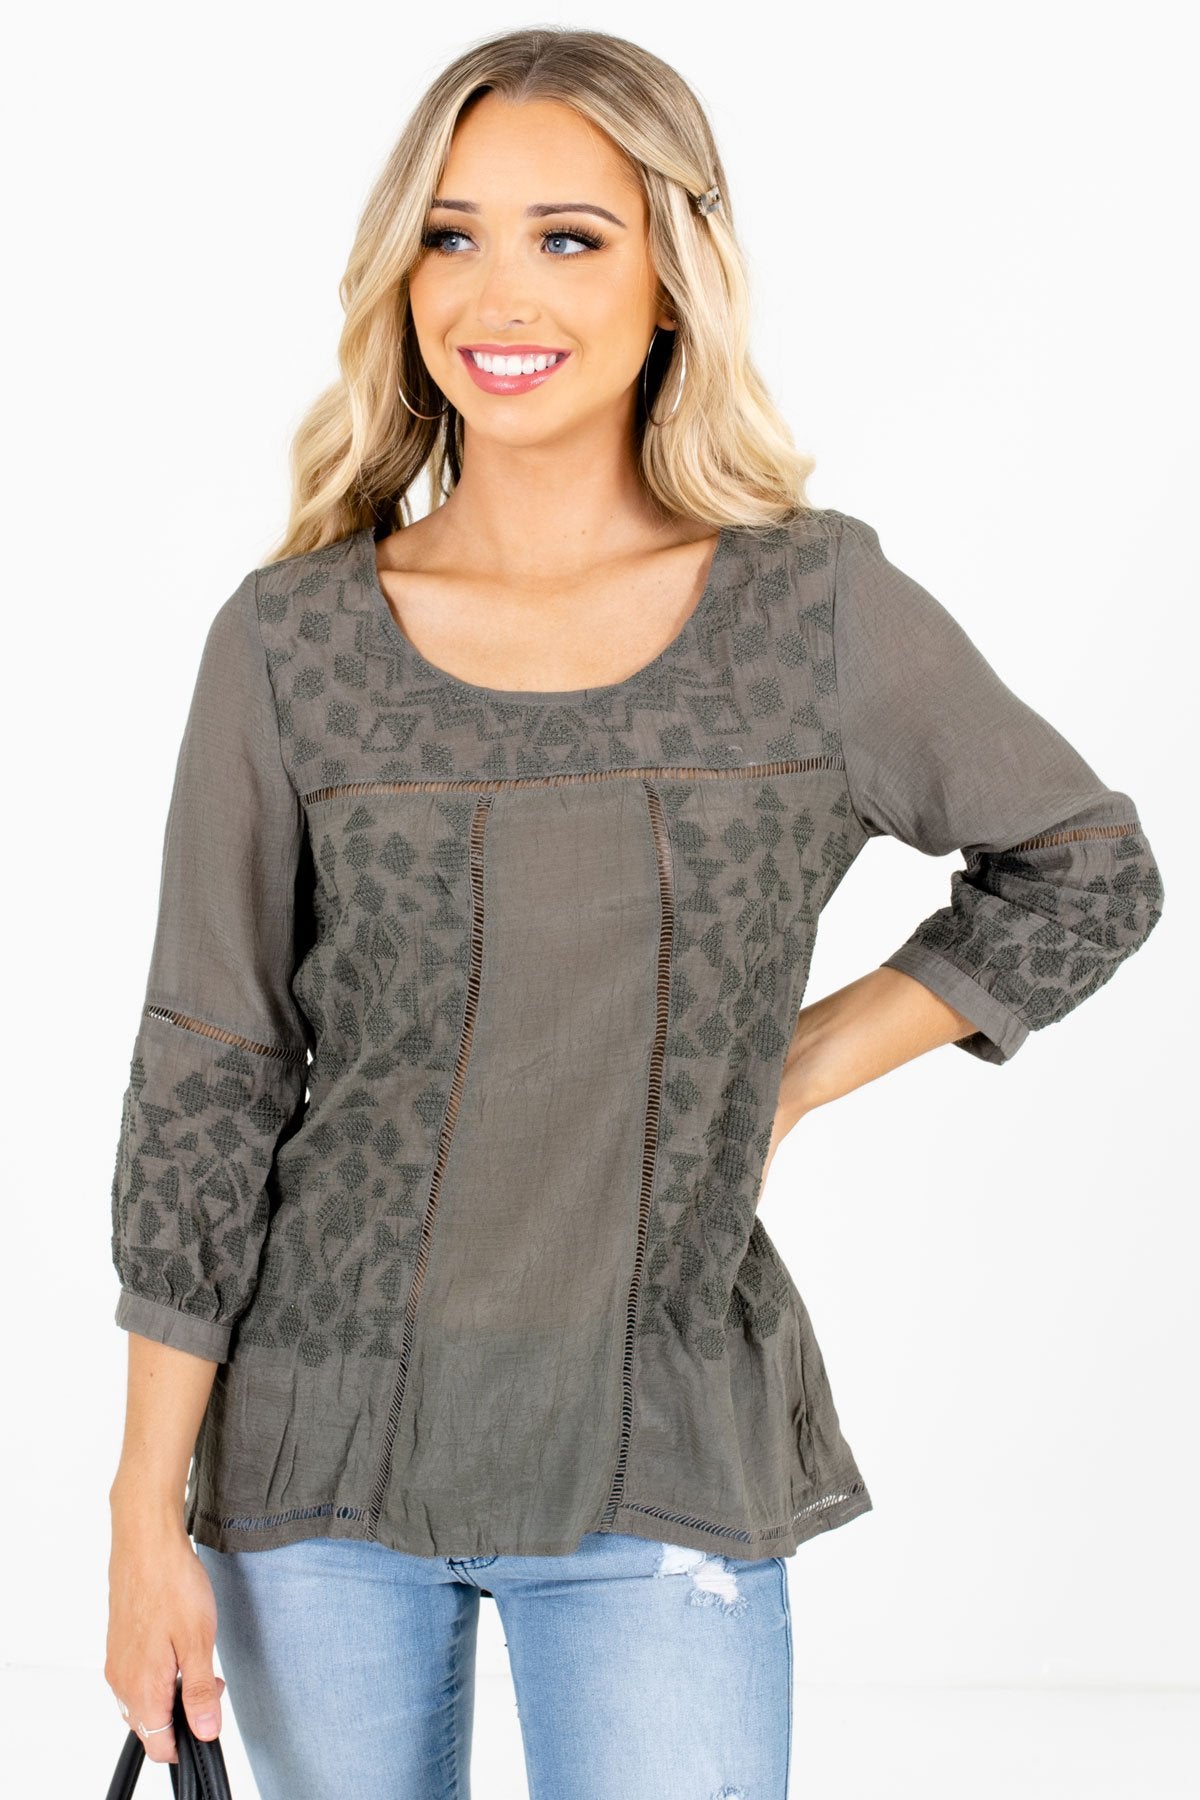 Olive Green Embroidered Ladder Lace Boutique Tops for Women